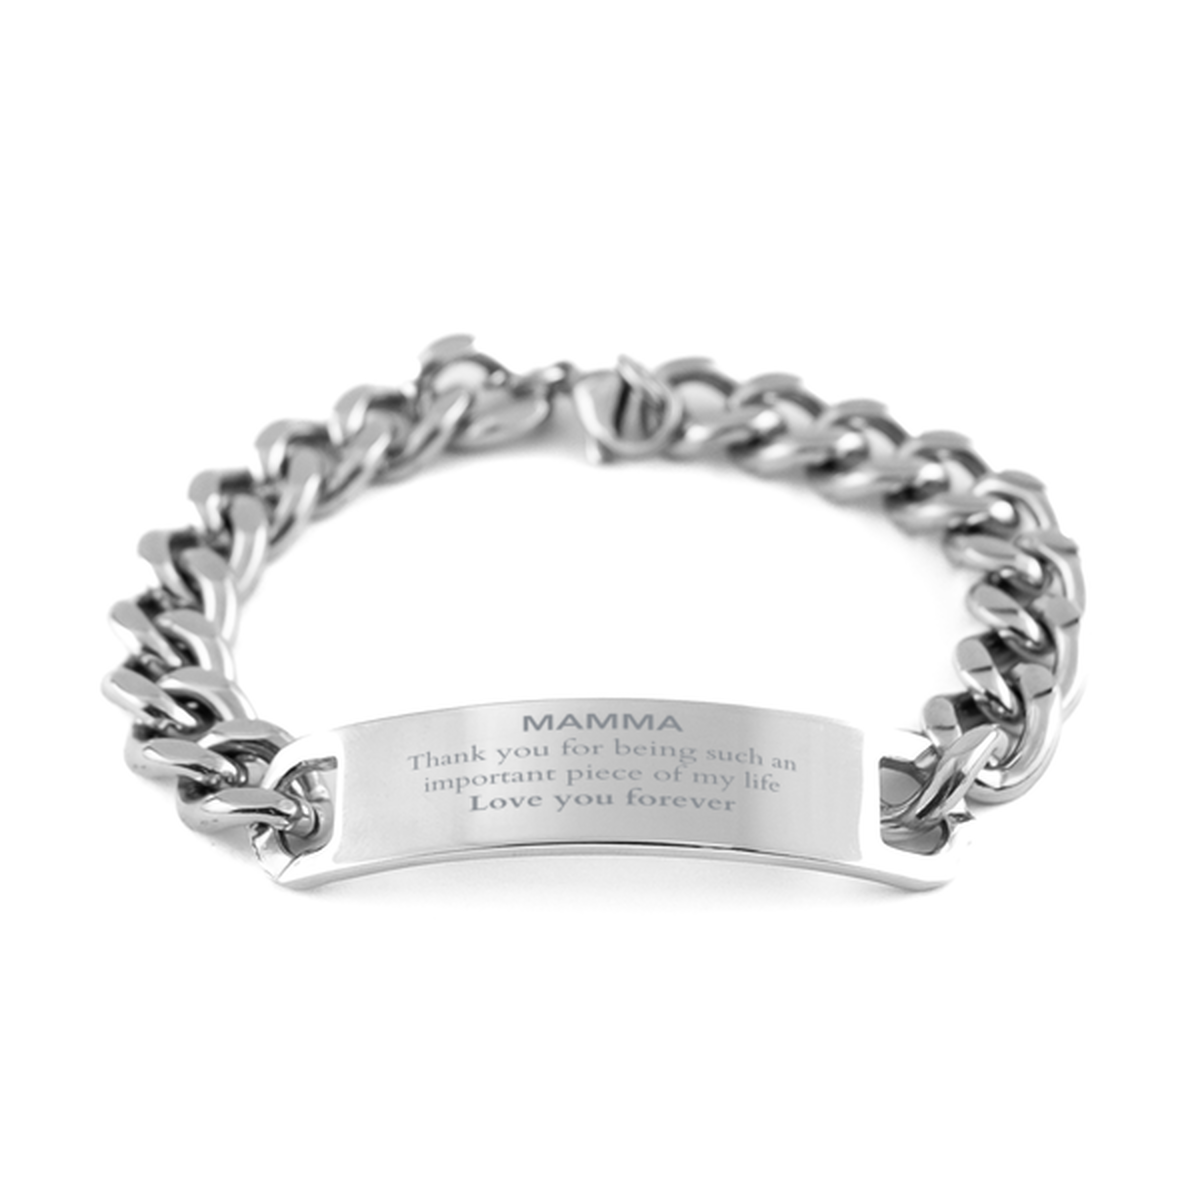 Appropriate Mamma Cuban Chain Stainless Steel Bracelet Epic Birthday Gifts for Mamma Thank you for being such an important piece of my life Mamma Christmas Mothers Fathers Day